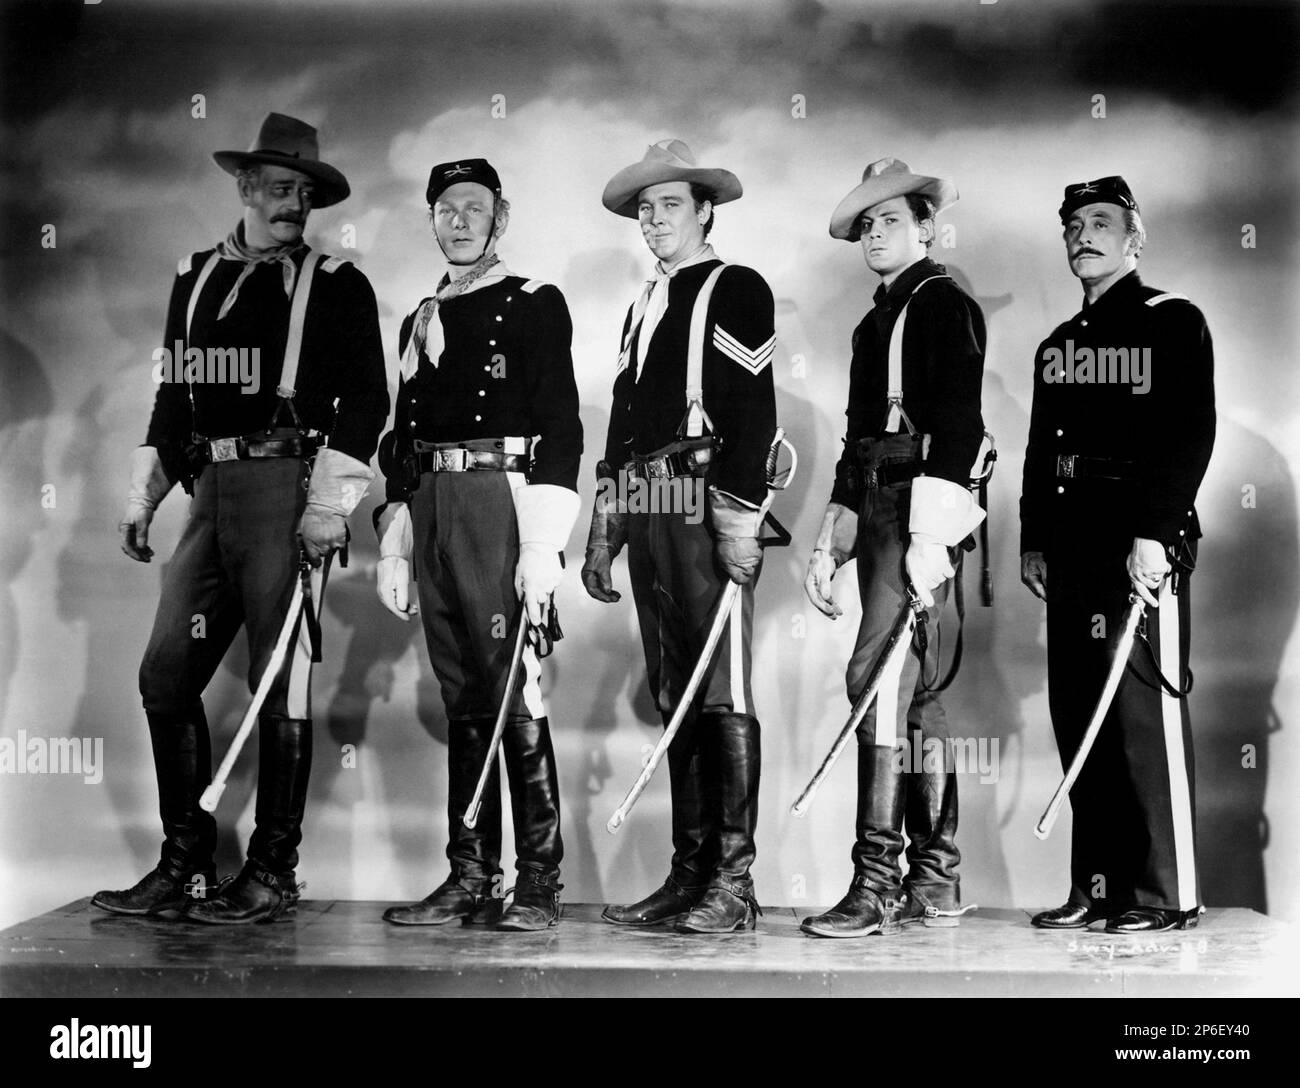 1948 : The  celebrated movie actors  JOHN WAYNE with GEORGE O'BRIEN (first from right)  in a pubblicitary shot for the movie SHE WORE A YELLOW RIBBON ( I cavalieri del Nord-Ovest ) by John FORD , from a novel by James Warner Bellah - CINEMA - ATTORE CINEMATOGRAFICO - COWBOY - WESTERN - hat - cappello -  FILM -spada - sword - foulard - bandanna - bandana - military uniform - uniforme divisa militare - gloves - guanti - cavalleria - booths - stivali  ----  Archivio GBB Stock Photo